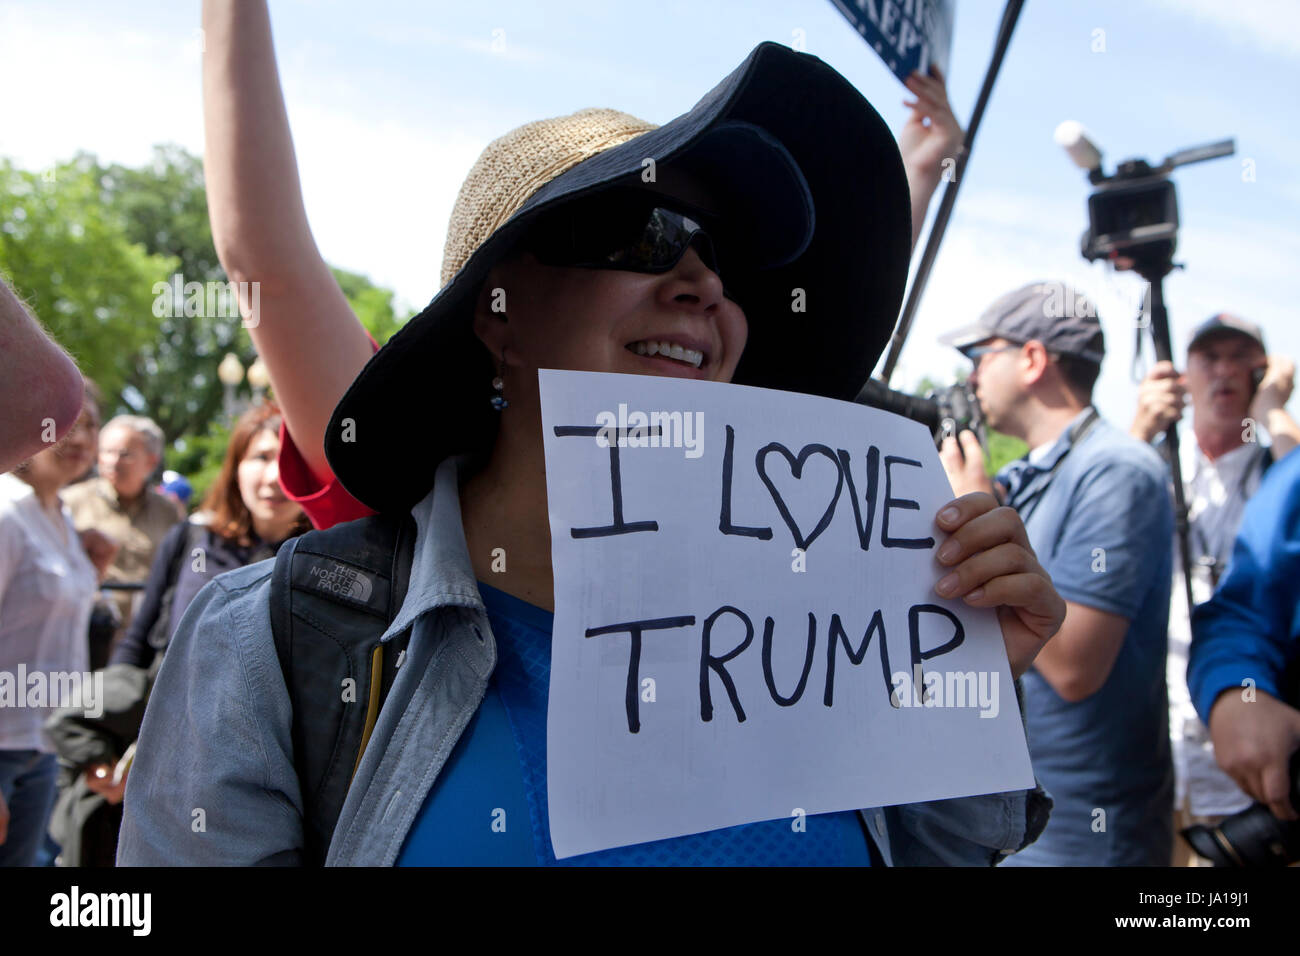 Trump supporter at a pro-Trump rally. Pictured: Woman holding "I Love Trump" sign - Washington, DC USA Stock Photo